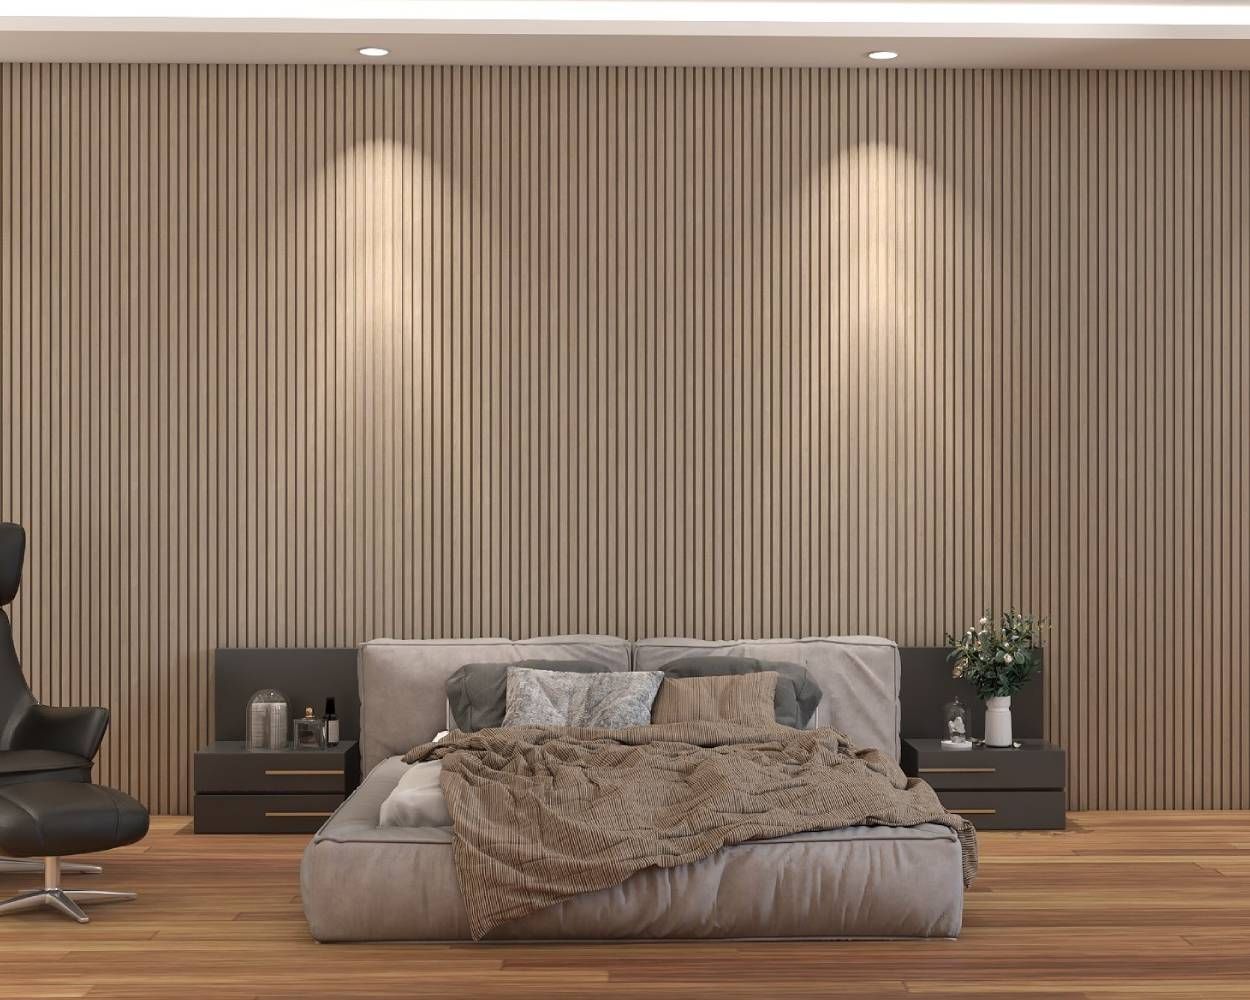 Contemporary Beige Master Bedroom Design With Grooved Wall Panelling